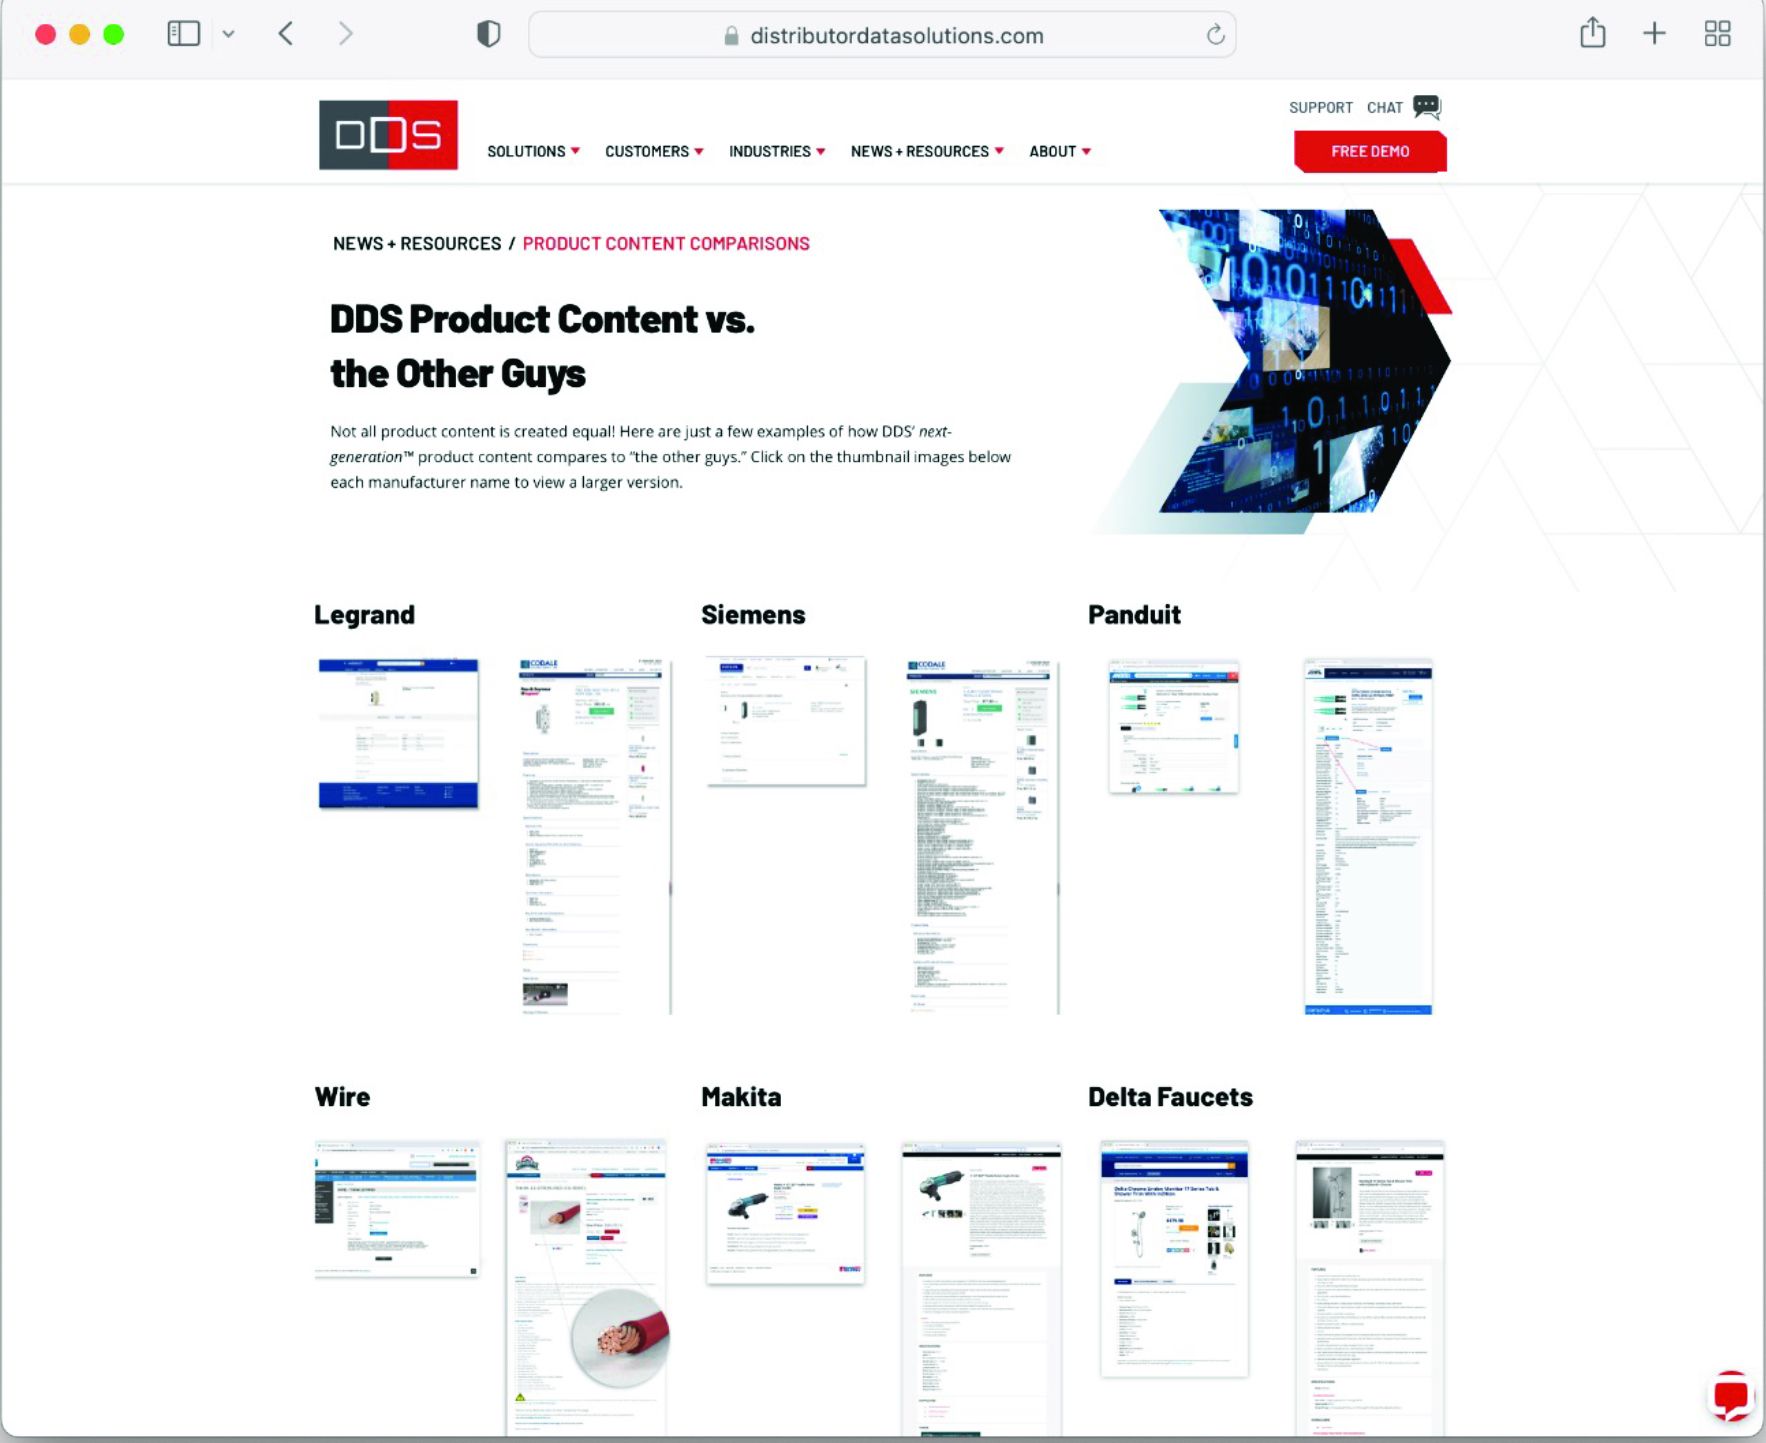 Sample e-commerce product content comparisons can be found on DDS’ website.